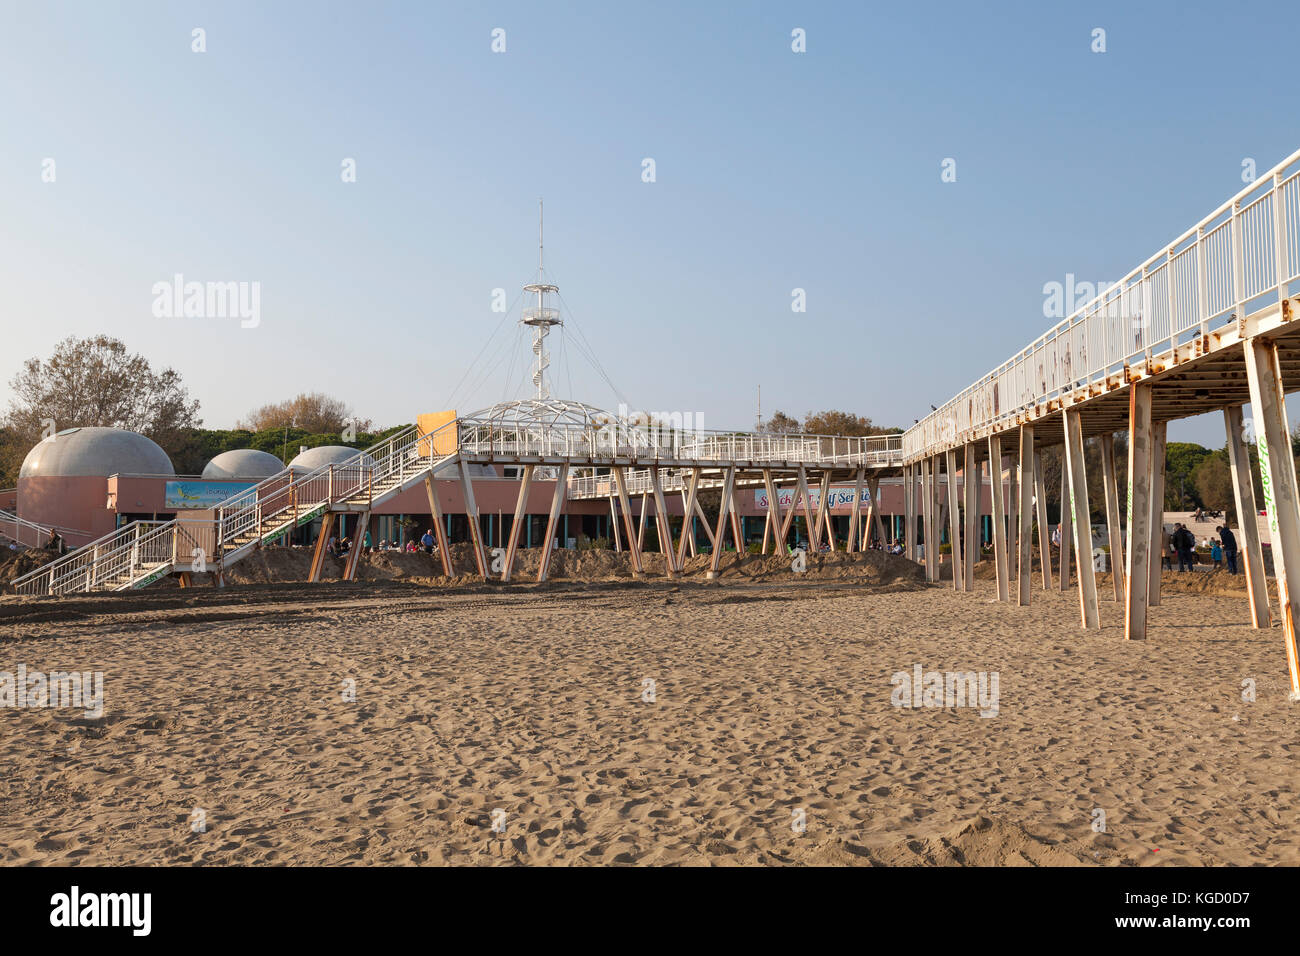 Blue Moon Beach , Lido di Venezia, Lido, Venice, Italy with a view of the old historic metal pier complex with its observation mast at sunset Stock Photo